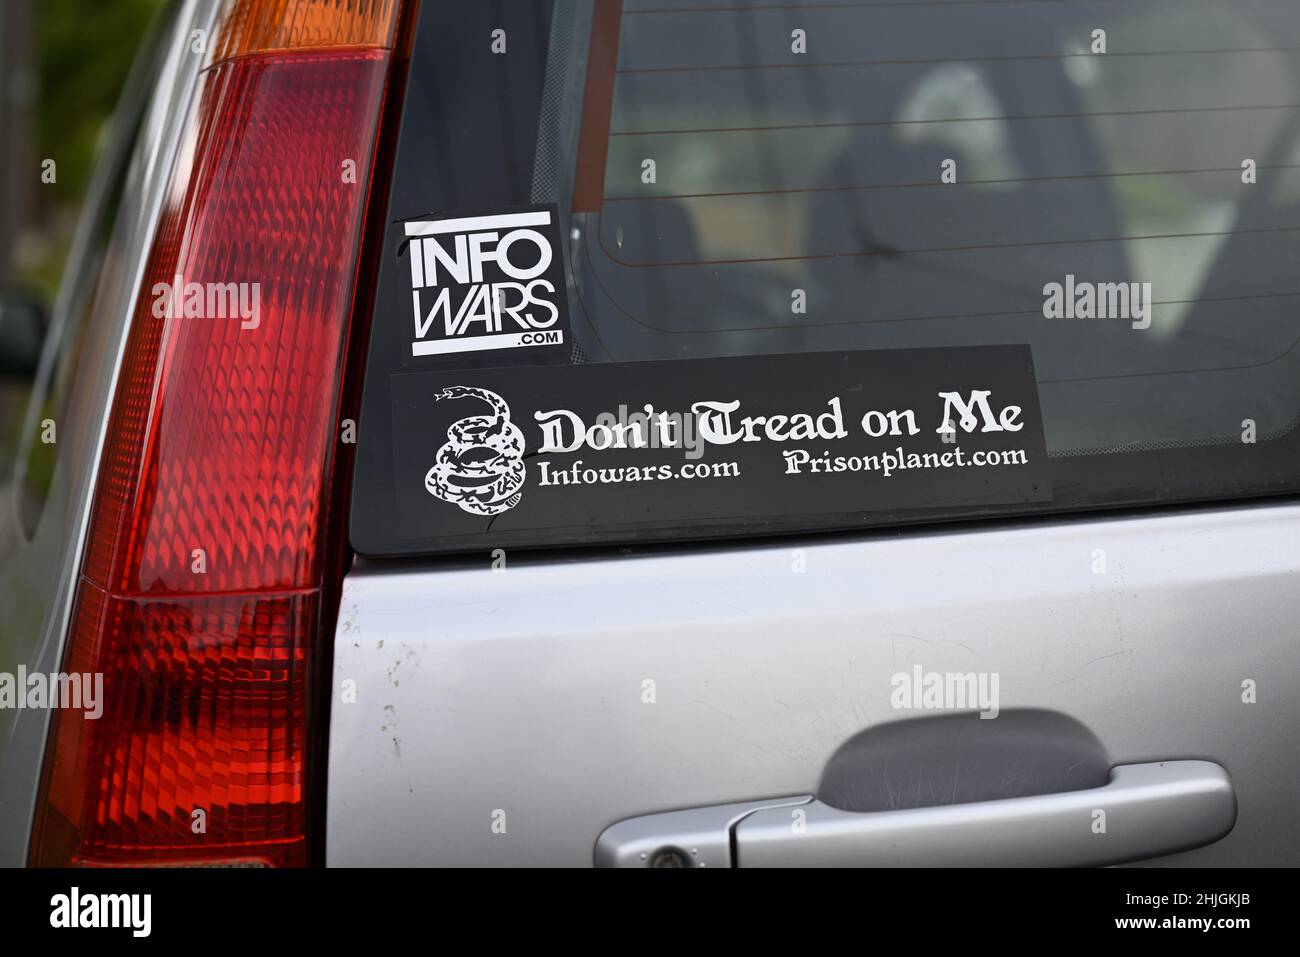 Two Info Wars stickers, with web addresses for infowars.com and prisonplanet.com, on the rear window of a silver vehicle Stock Photo